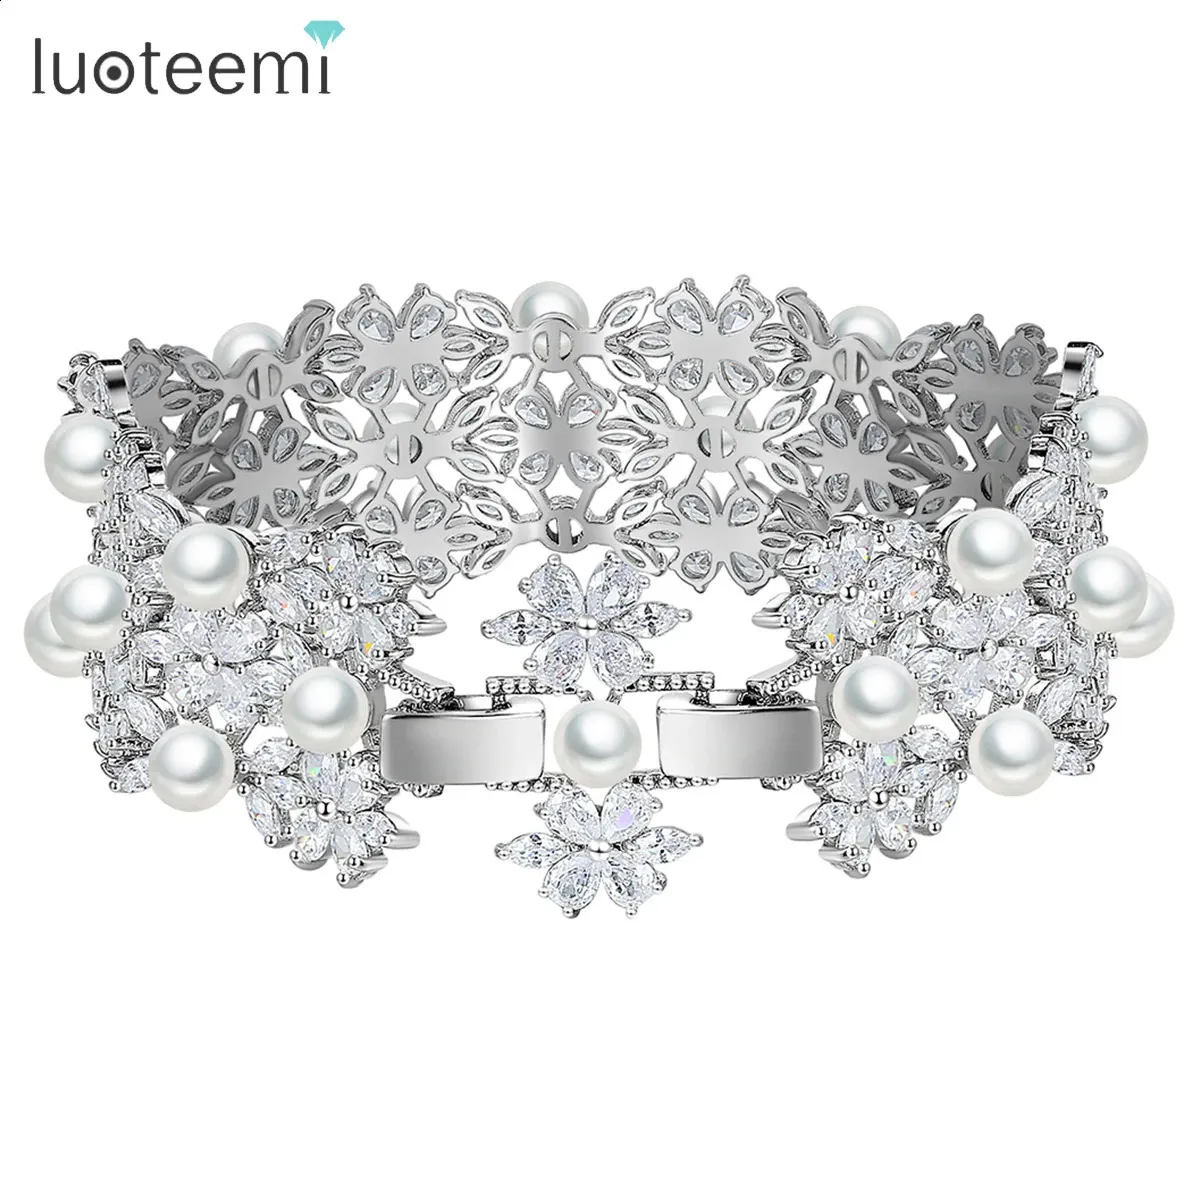 Manschett Luoteemi Multiple Imitation Pearl Beads Wide Luxury Armband For Women Flower Cubic Zircon Bangle For Bridal Wedding Accessories 231116